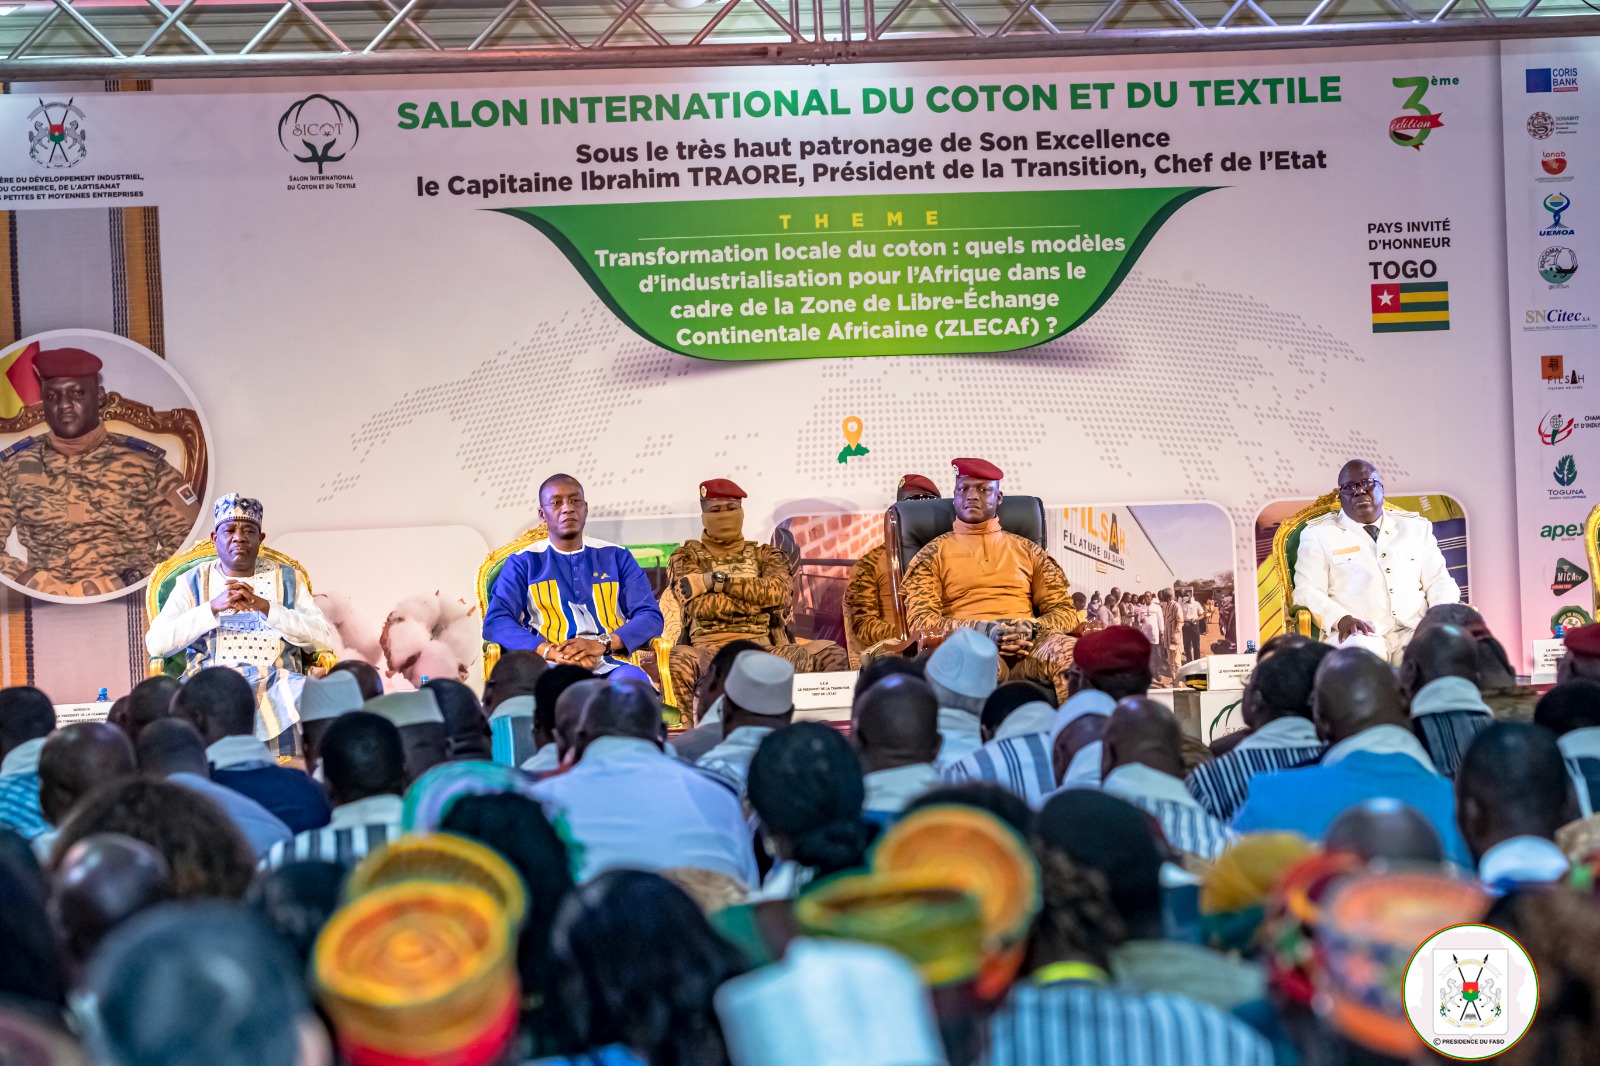  3rd edition of the SICOT: a great opportunity for exchanges on the best way to exploit the AfCFTA agreement 